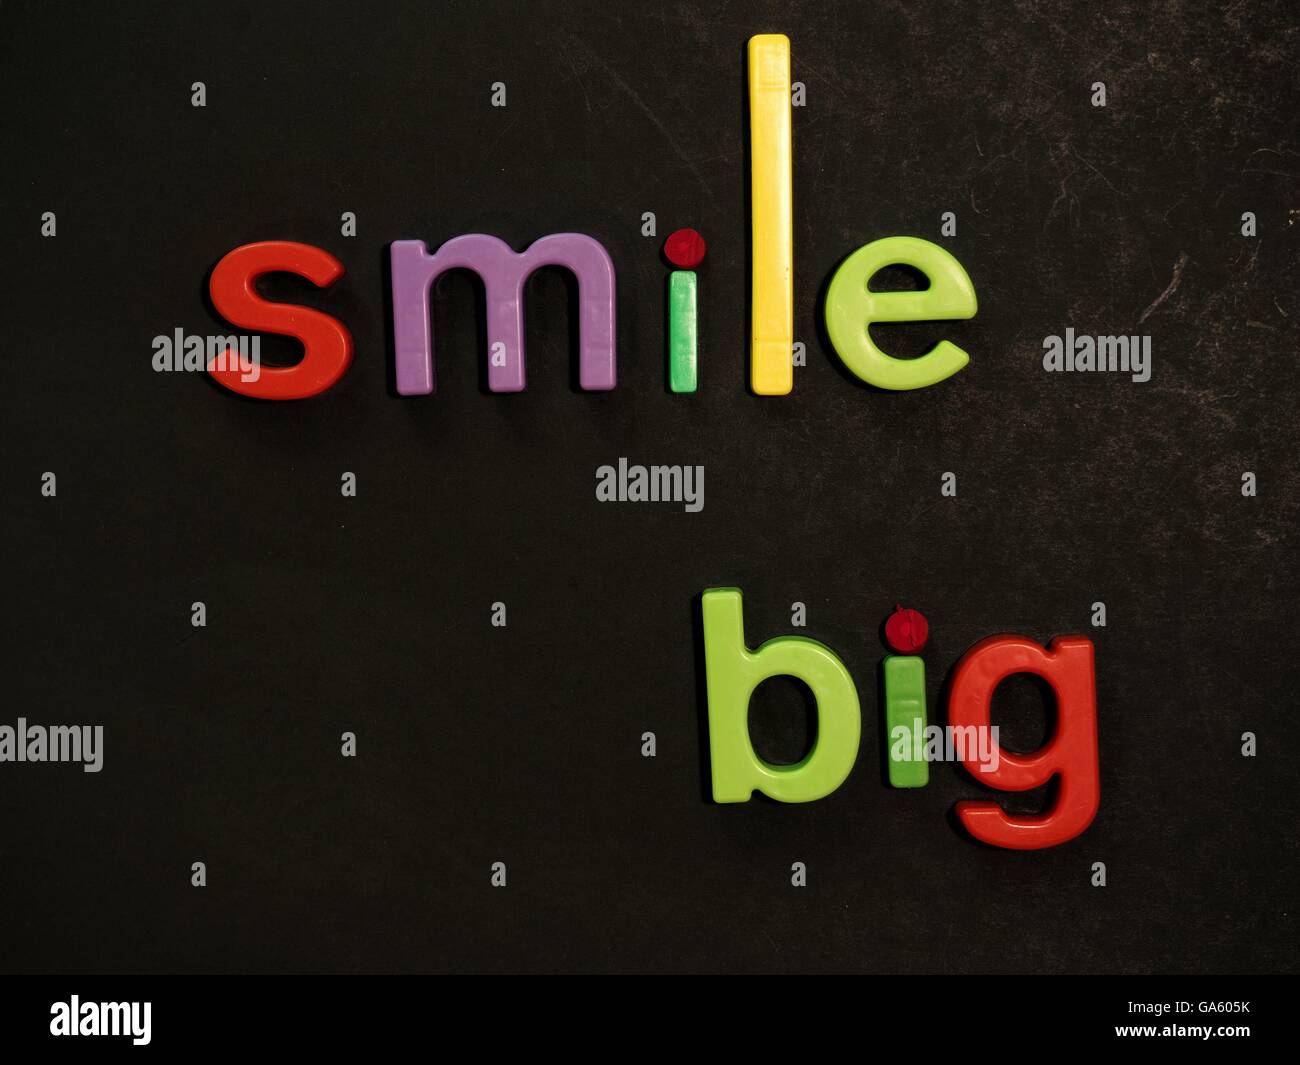 Smile! Inspirational message in vibrant colorful magnet letters Stock Photo